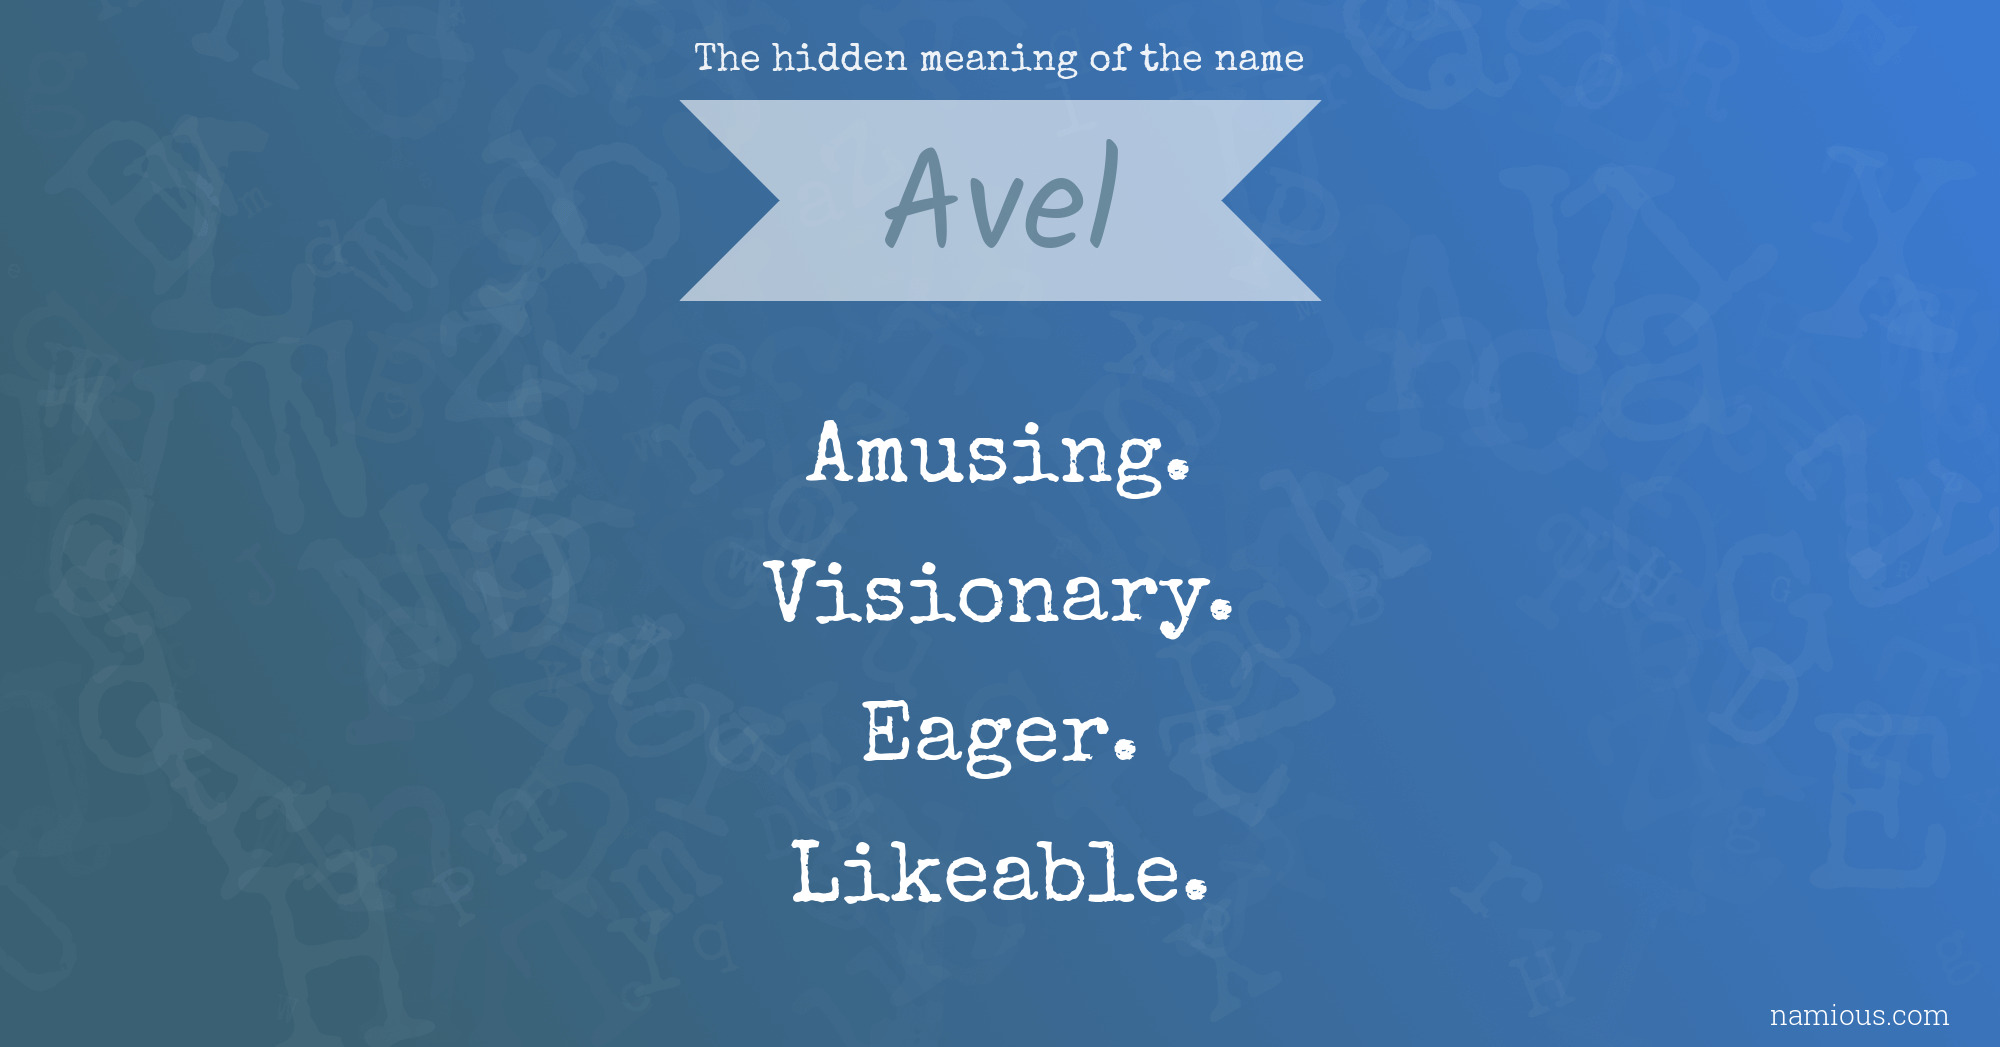 The hidden meaning of the name Avel